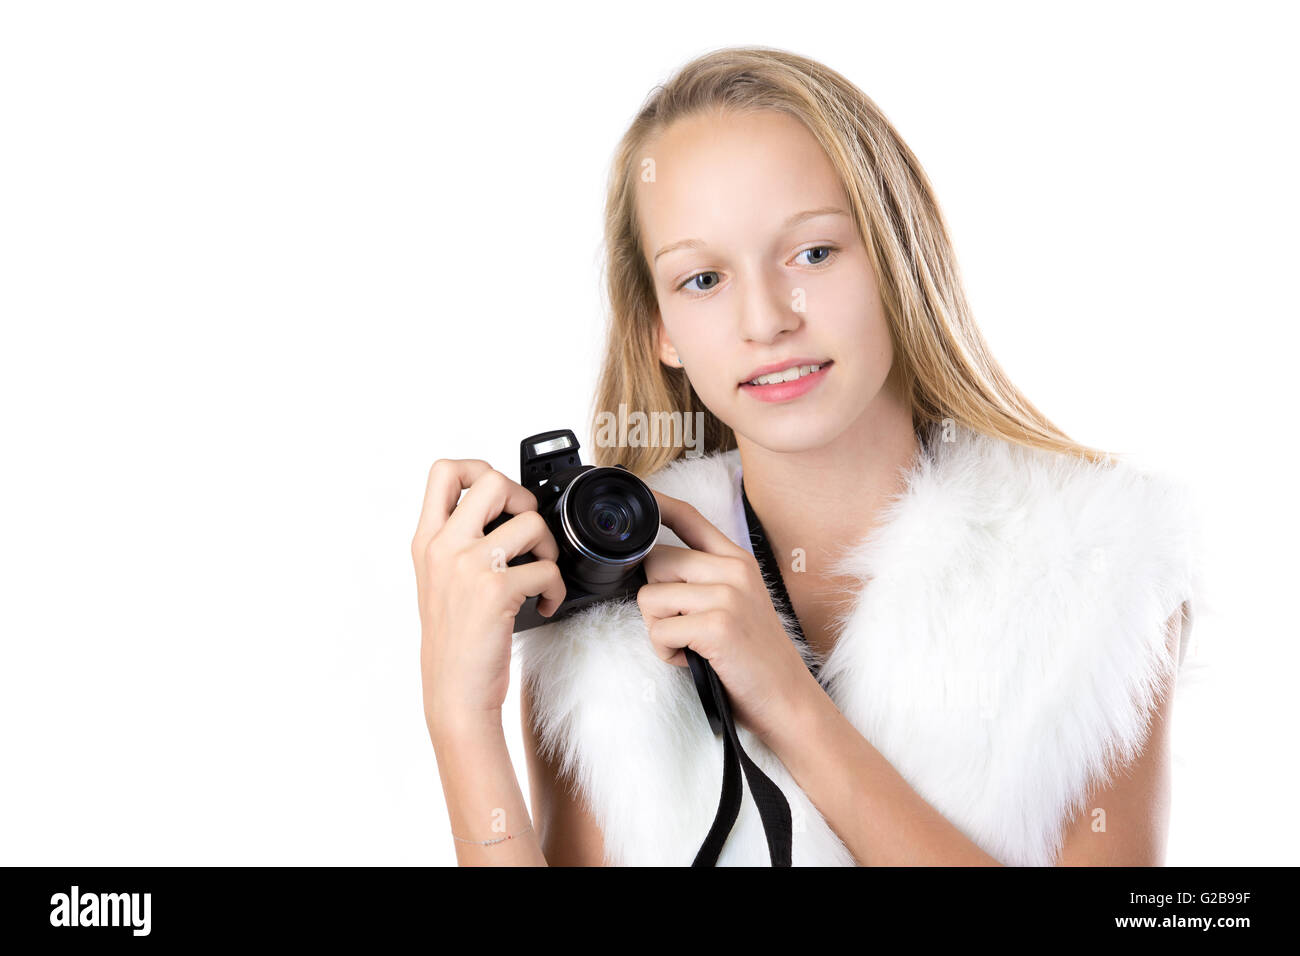 Portrait of happy cute beautiful blond girl wearing white furry outfit, holding digital camera with thoughtful expression Stock Photo